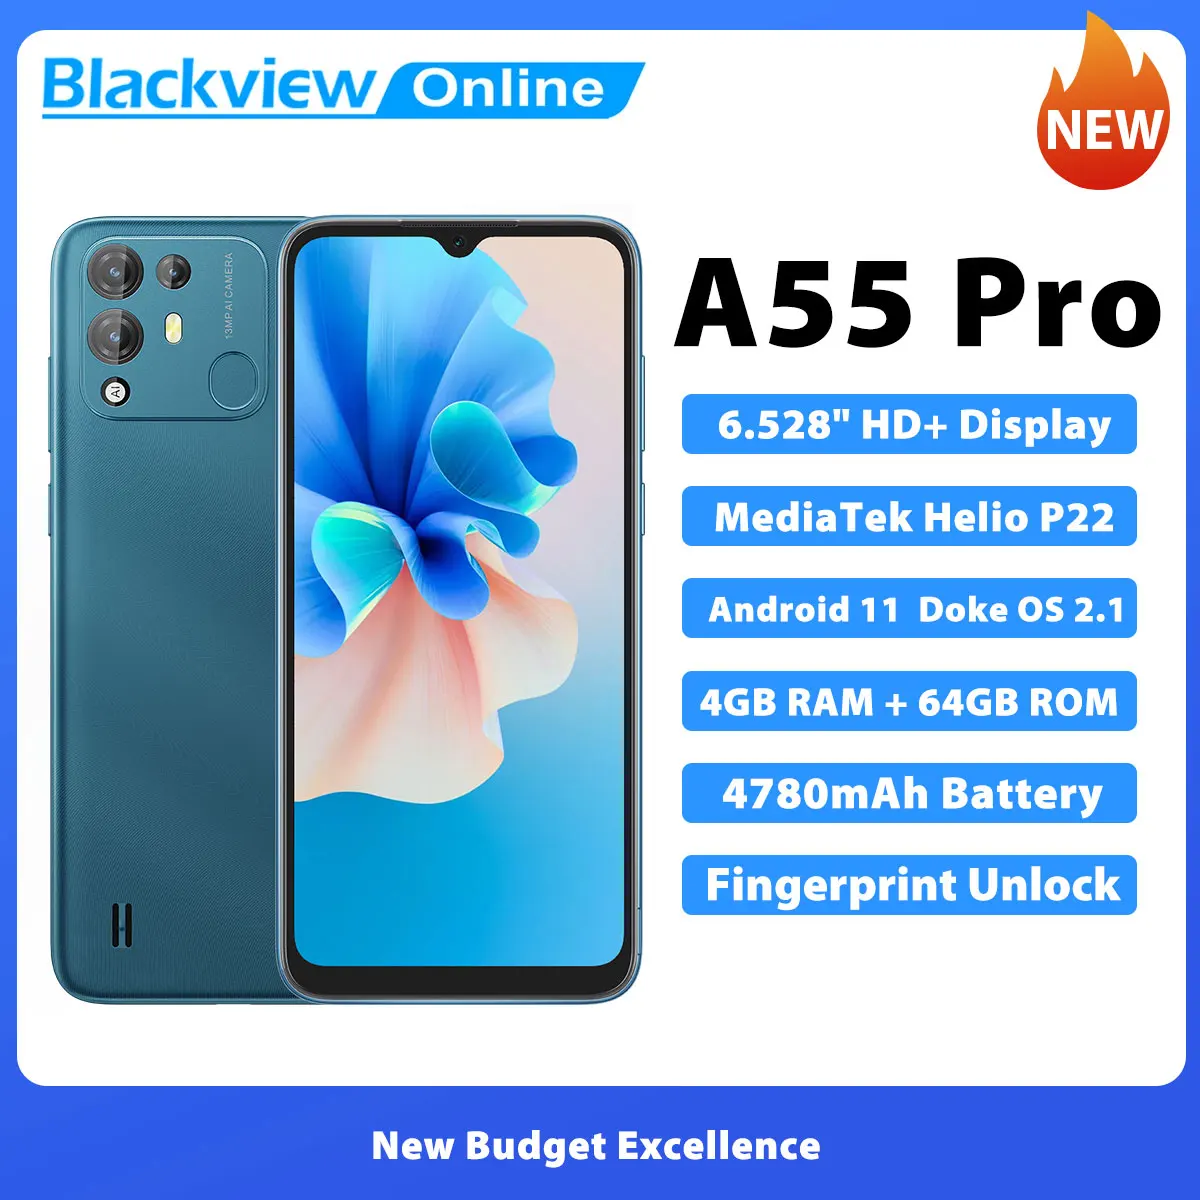 

Blackview A55 Pro Smartphone 6.52" Display Android 11 Mobile Phone 4GB 64GB Helio P22 Octa Core 13MP Camera 4780mAh Cell Phone